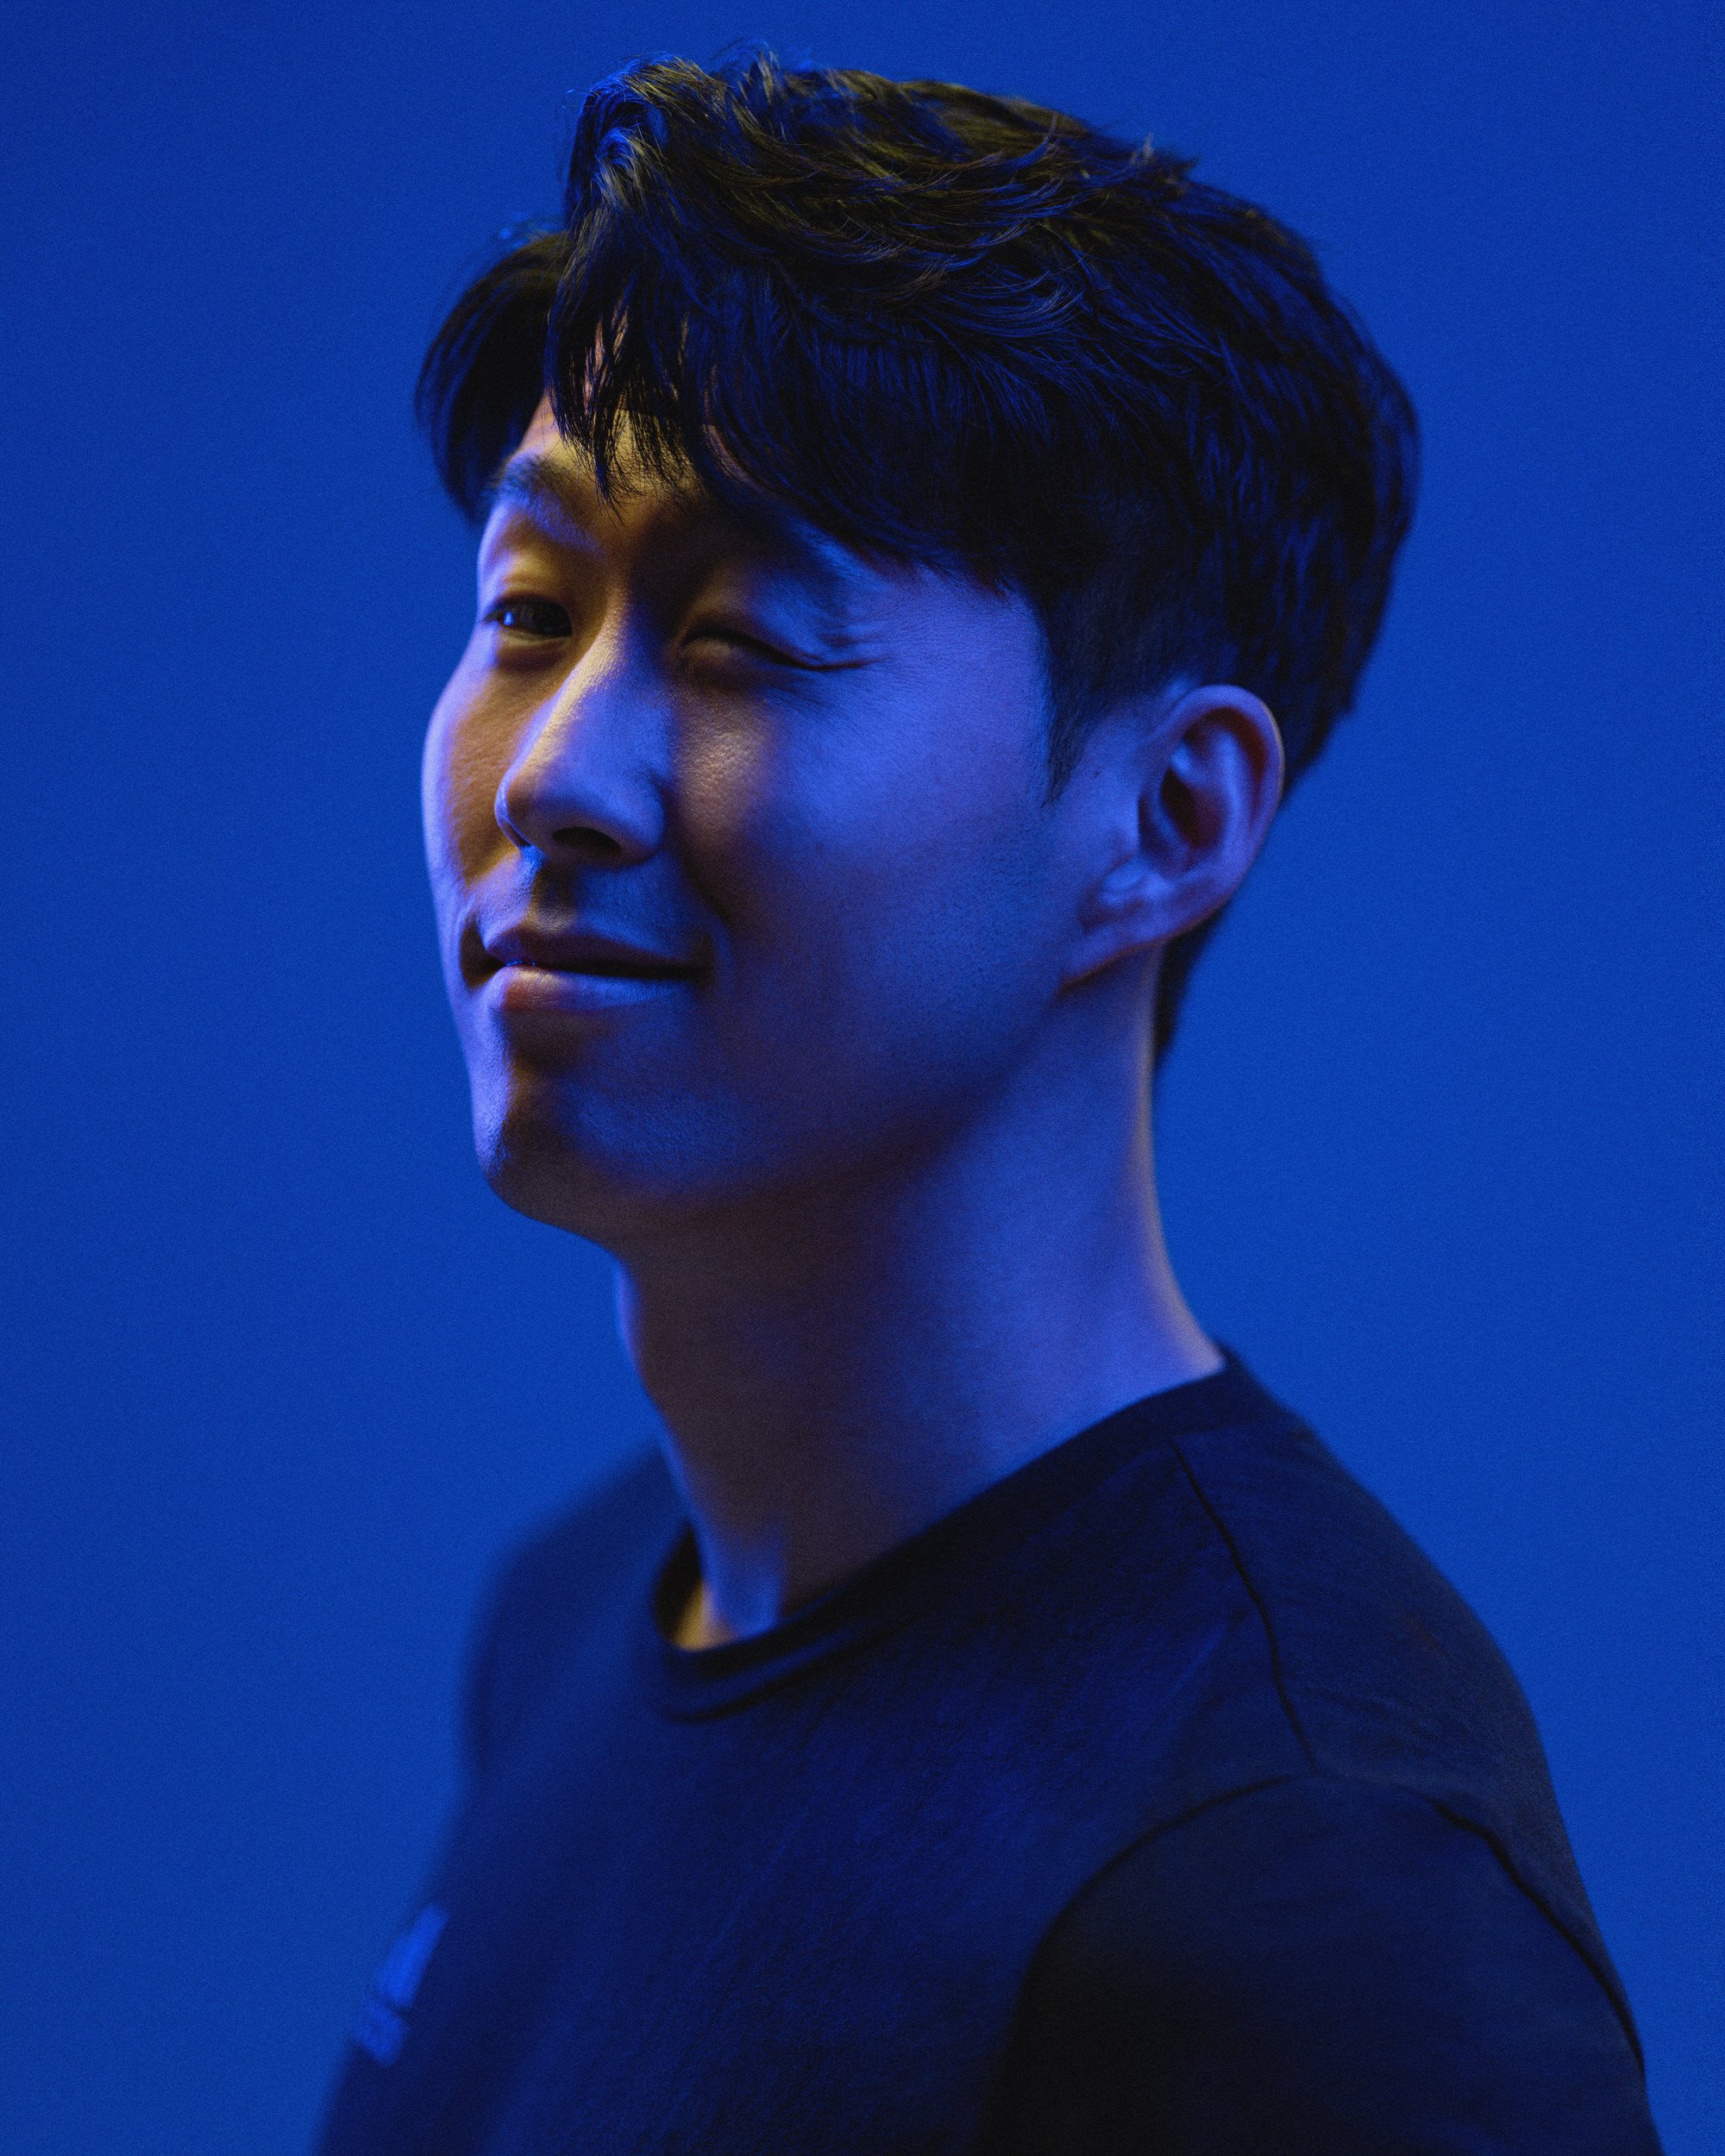  Son Heung-min for Adidas, London 2019 